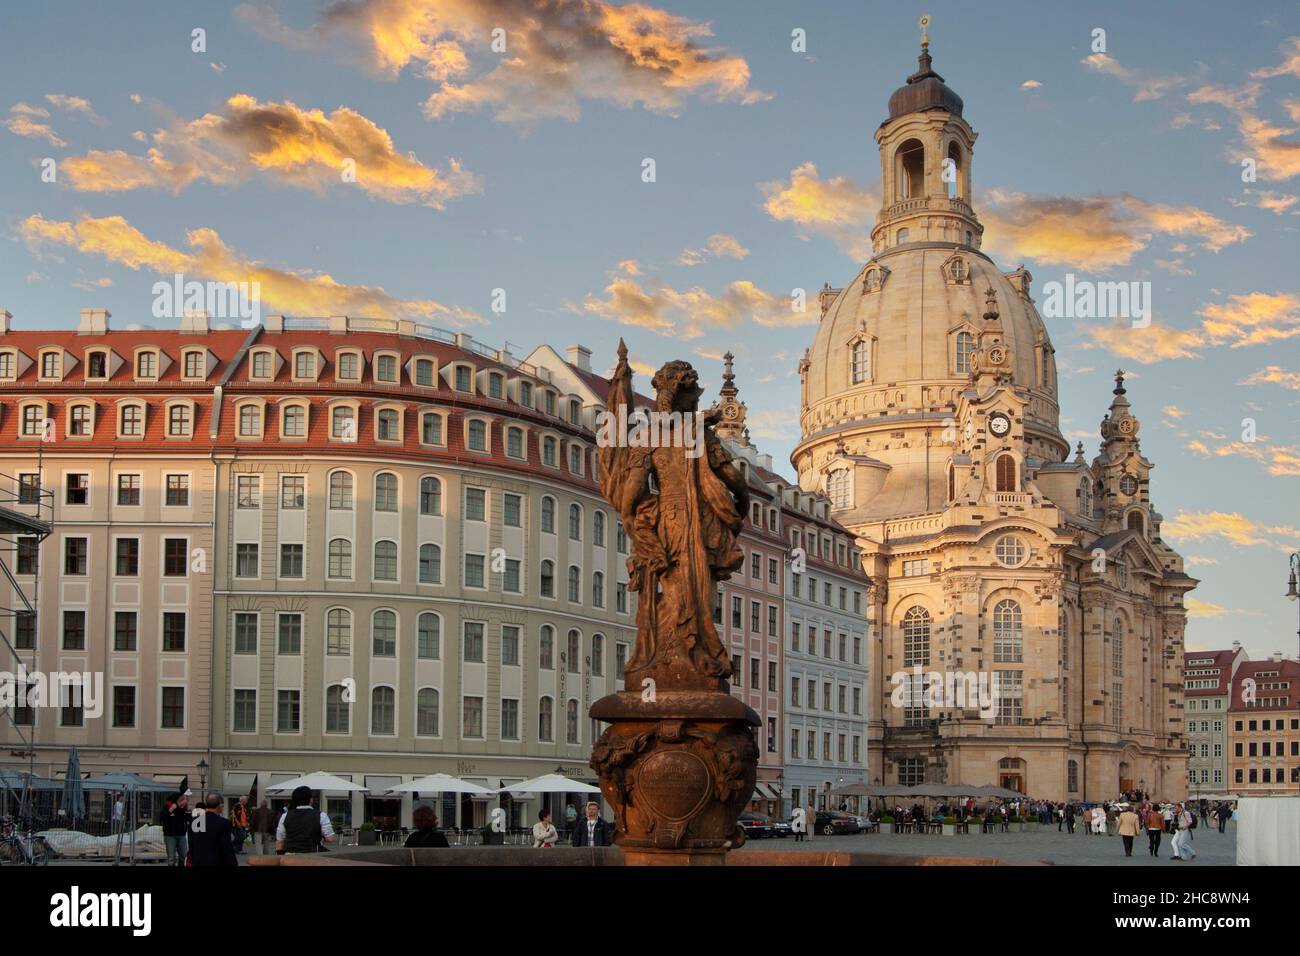 Frauenkirche (Church of Our Lady) with the Fountain of peace in the foreground., in Dresden, May 2010 Stock Photo